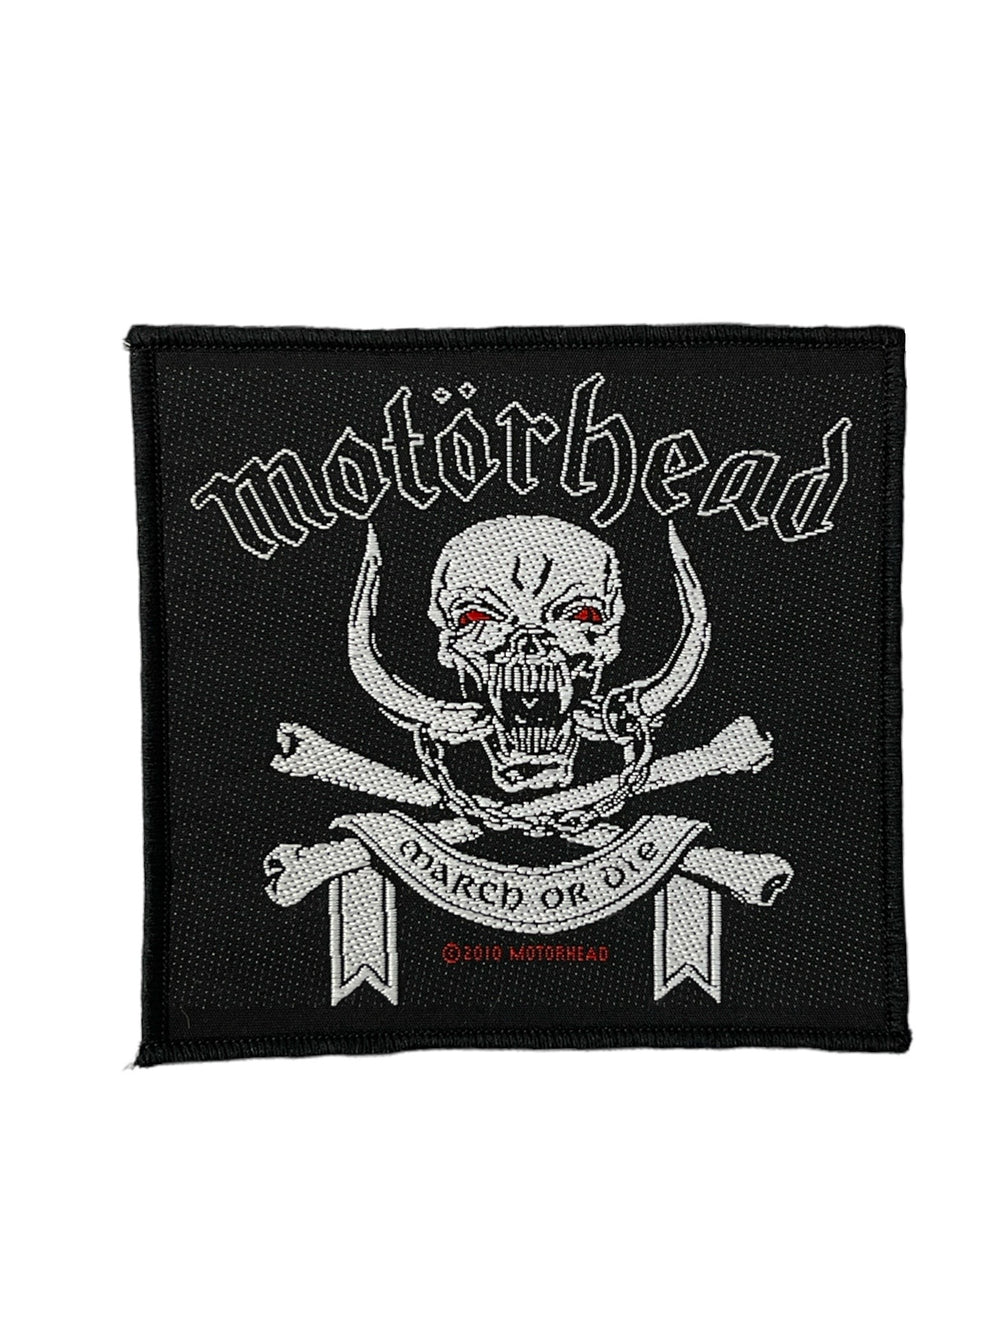 Motorhead March Or Die Official Woven Patch Brand New